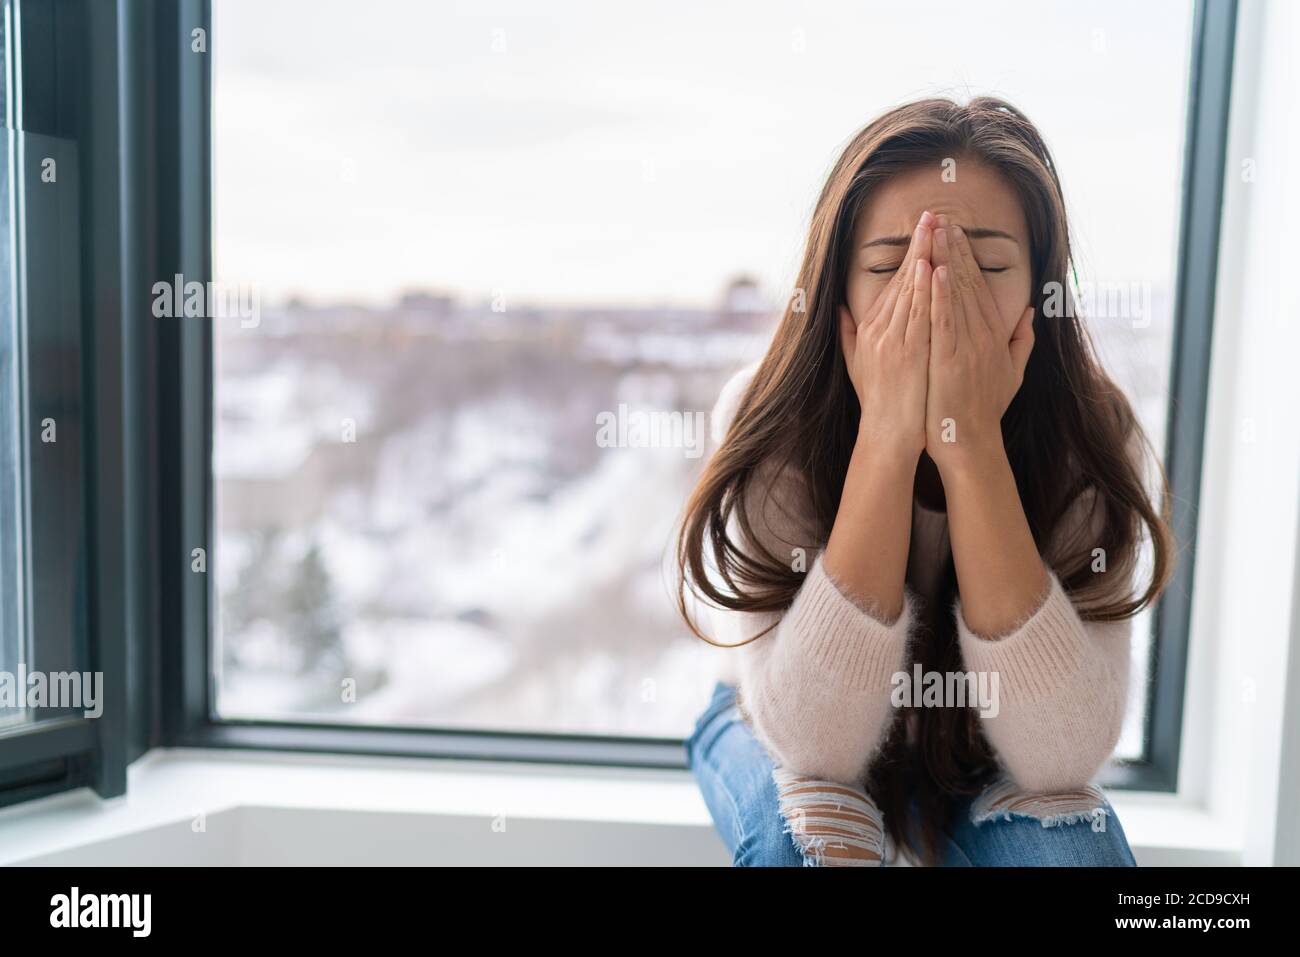 Anxiety winter depression woman having a panic attack and a hard time breathing. Home alone girl crying stressed depressed Stock Photo